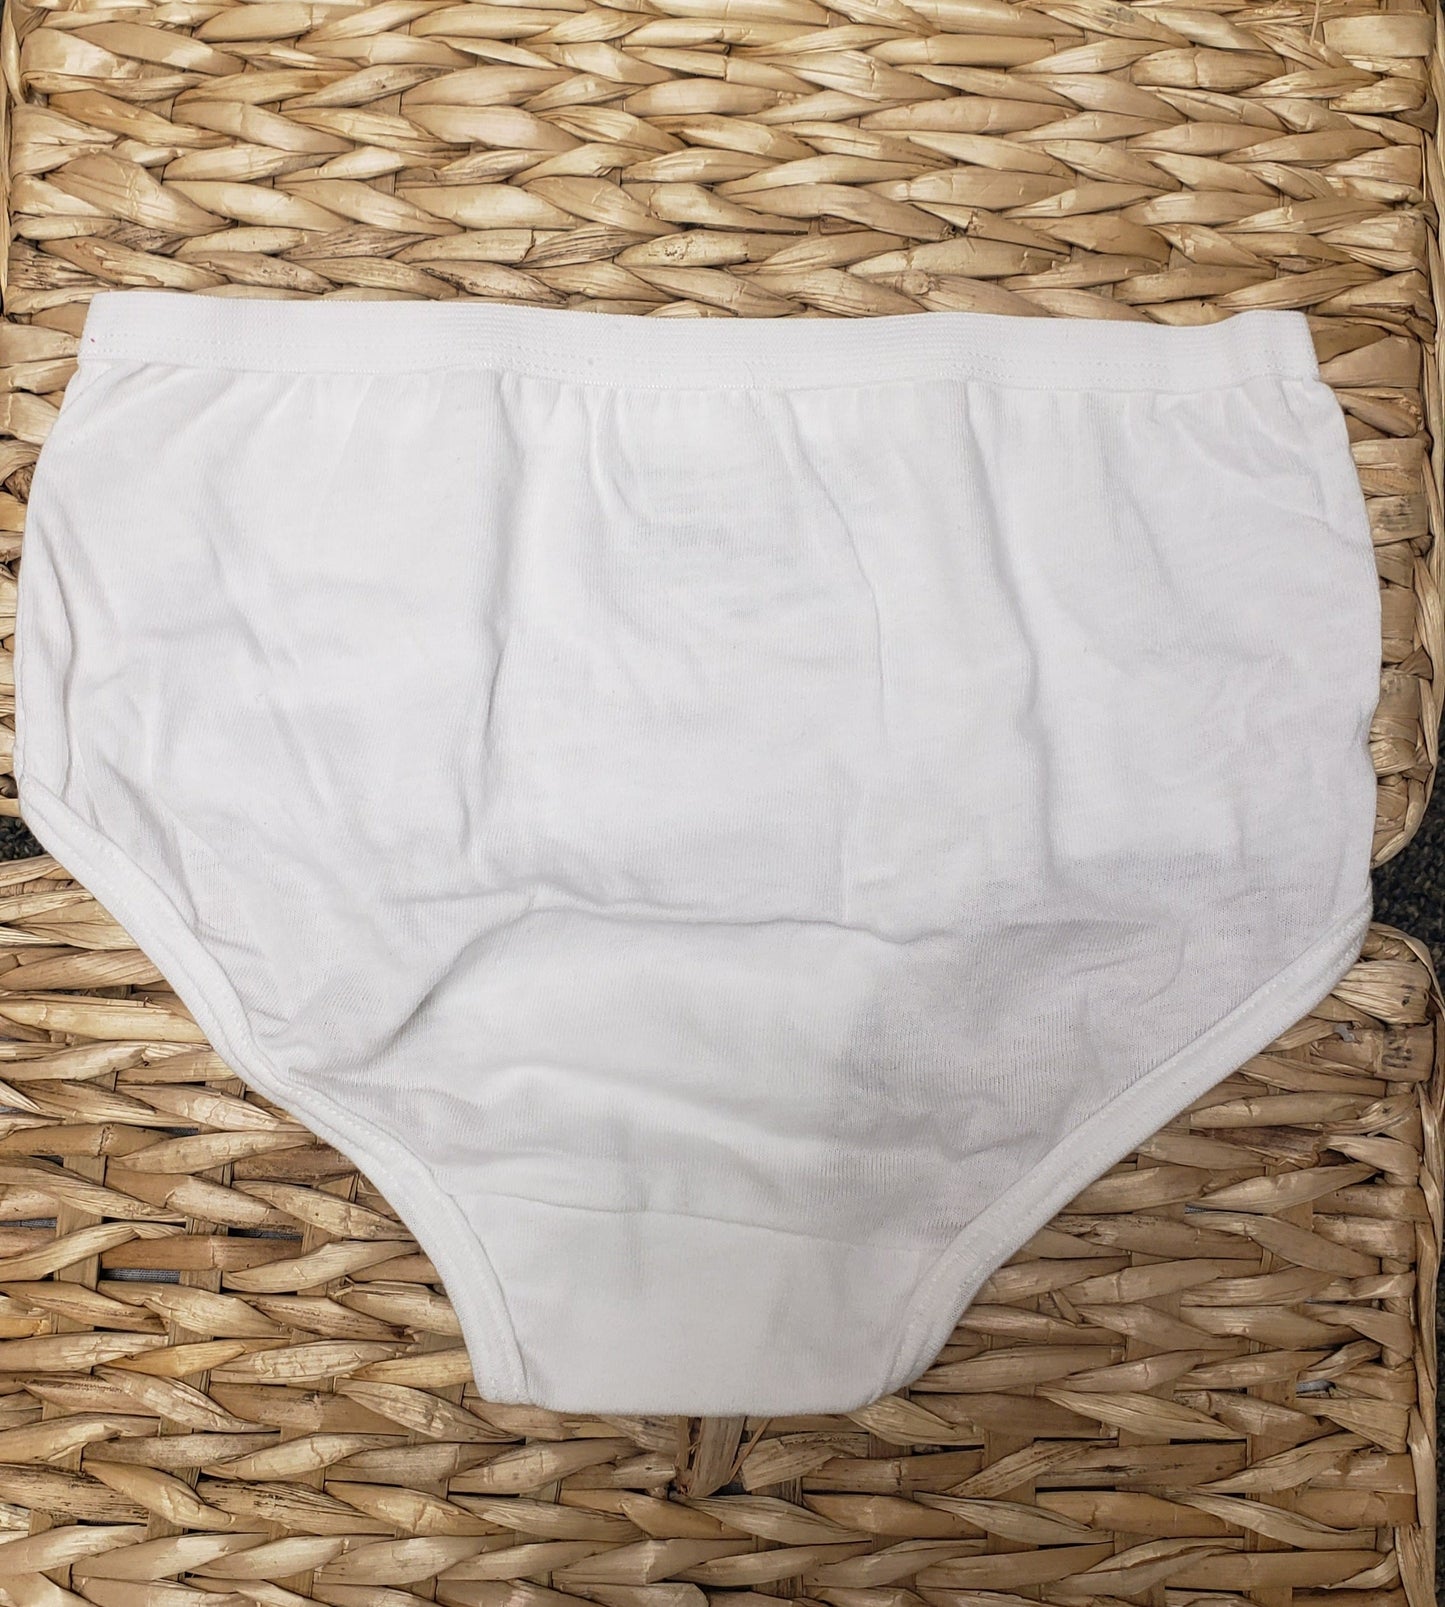 Cotton Panty Brief - 2 Pack